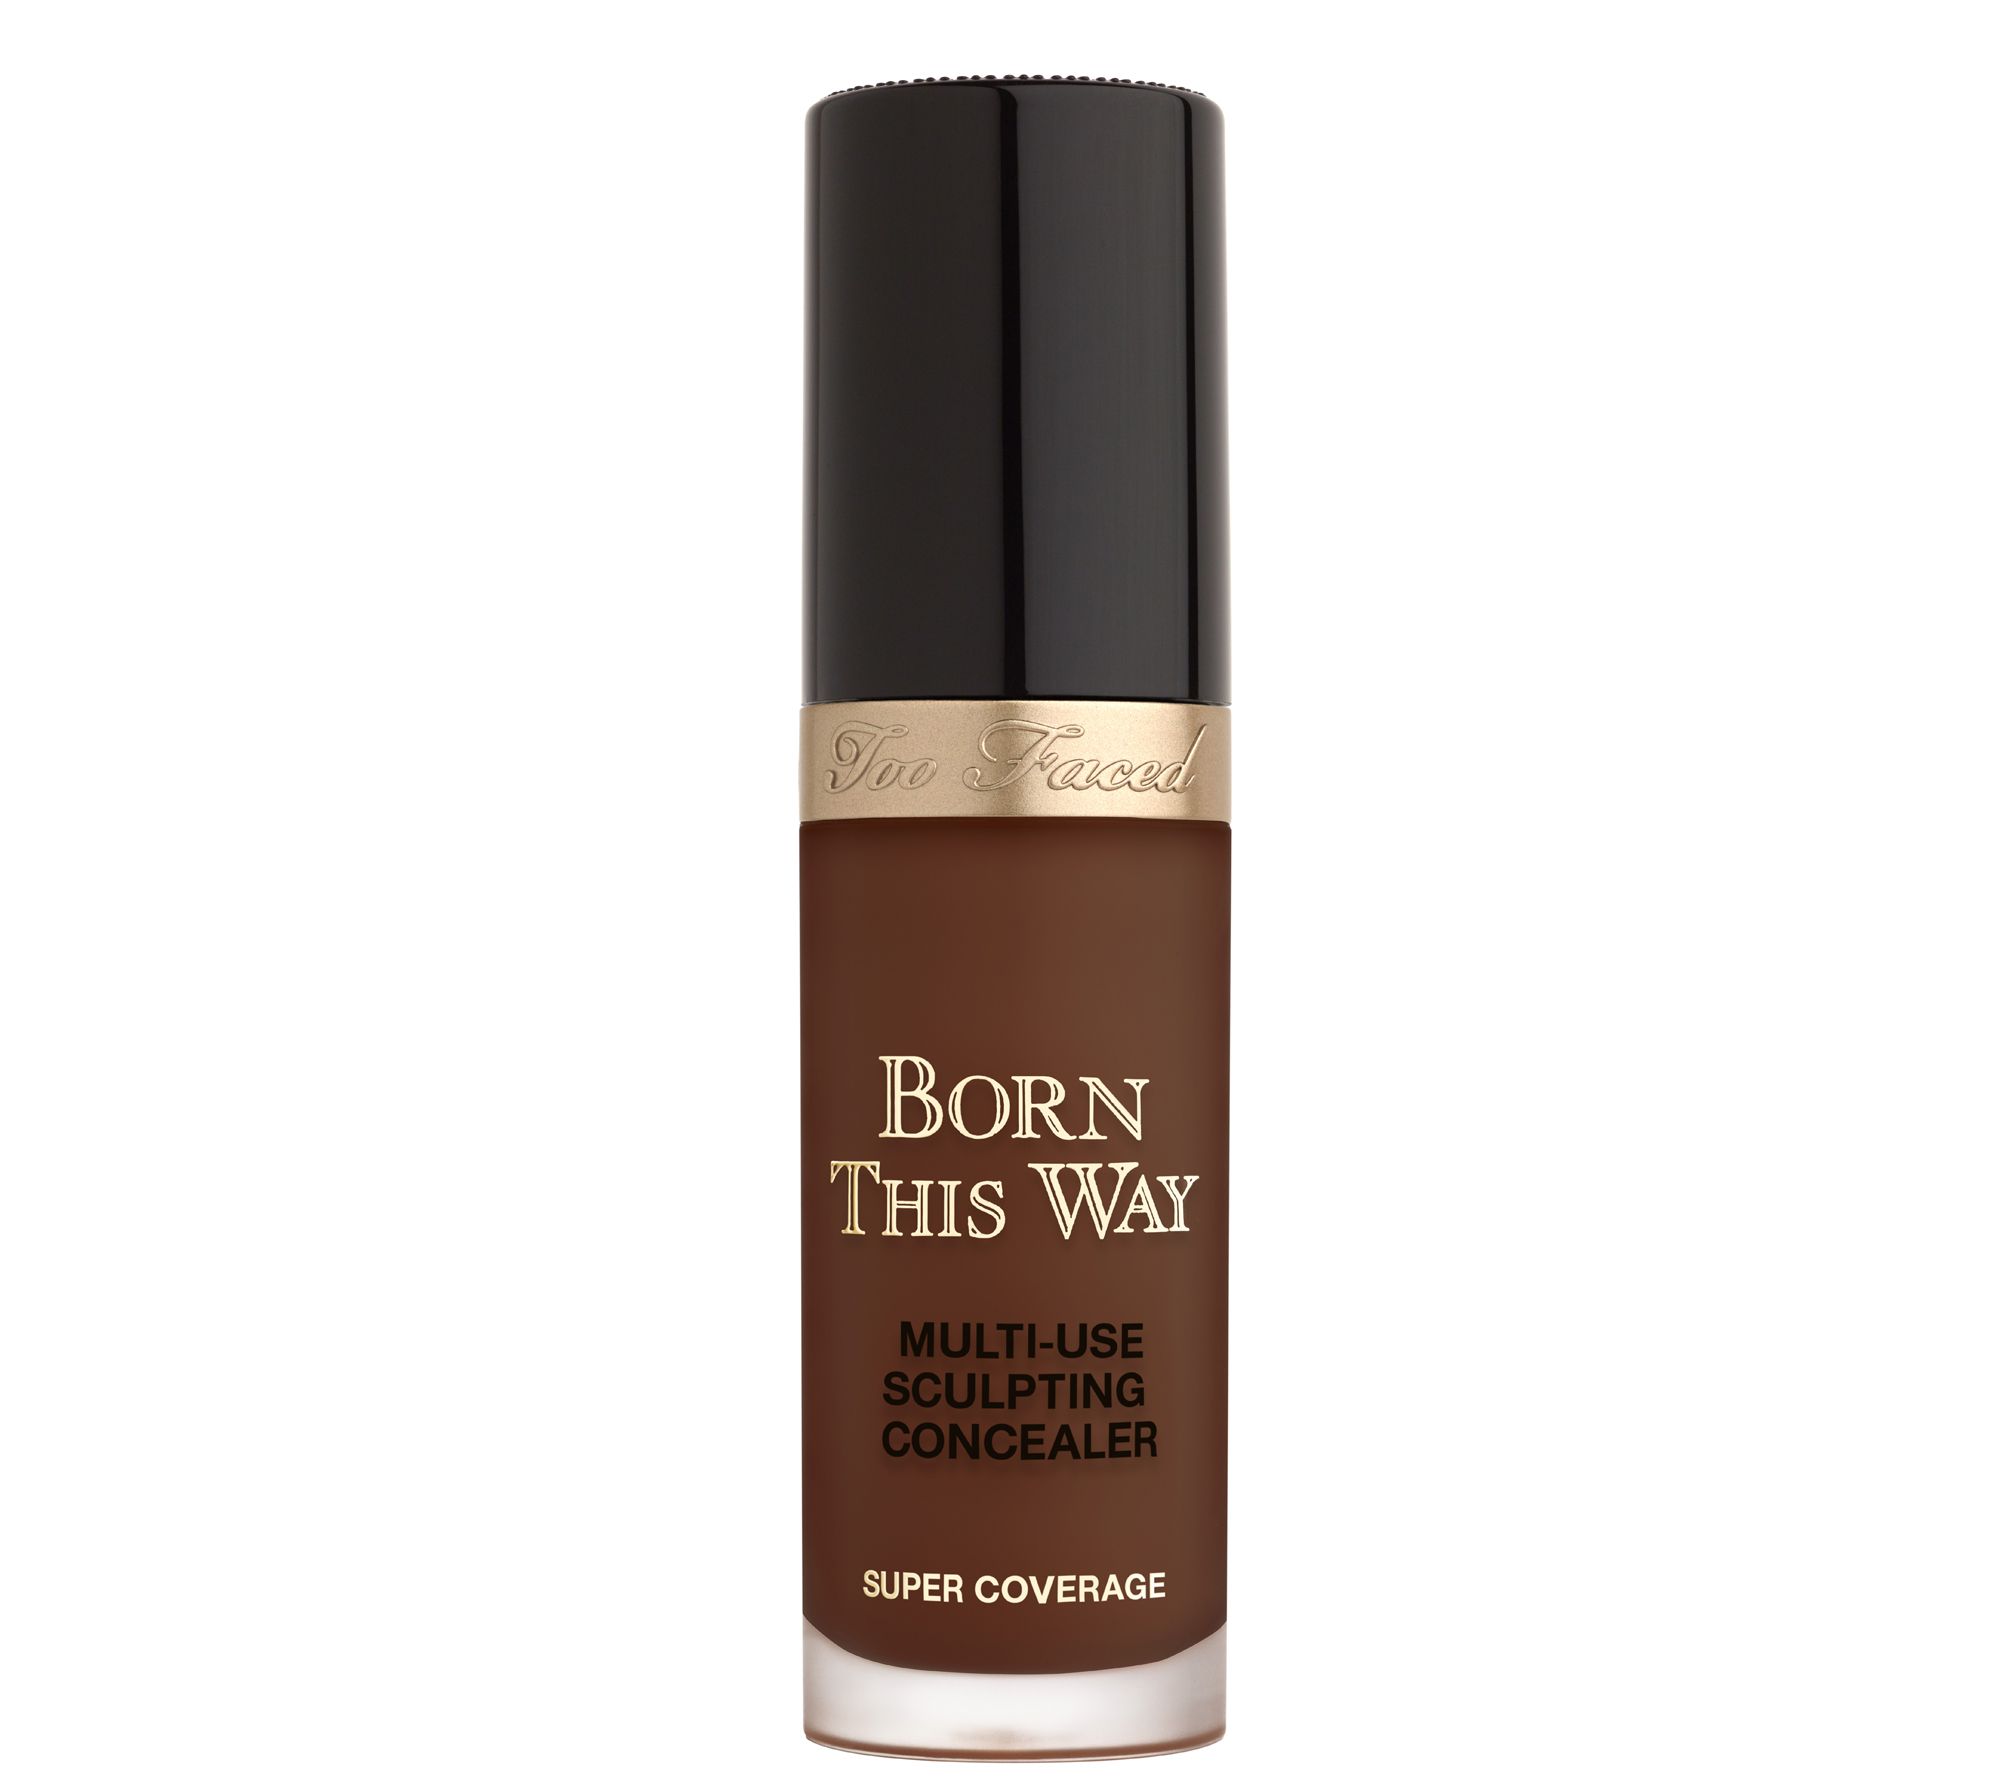  Too Faced Born This Way Super Coverage Multi-Use